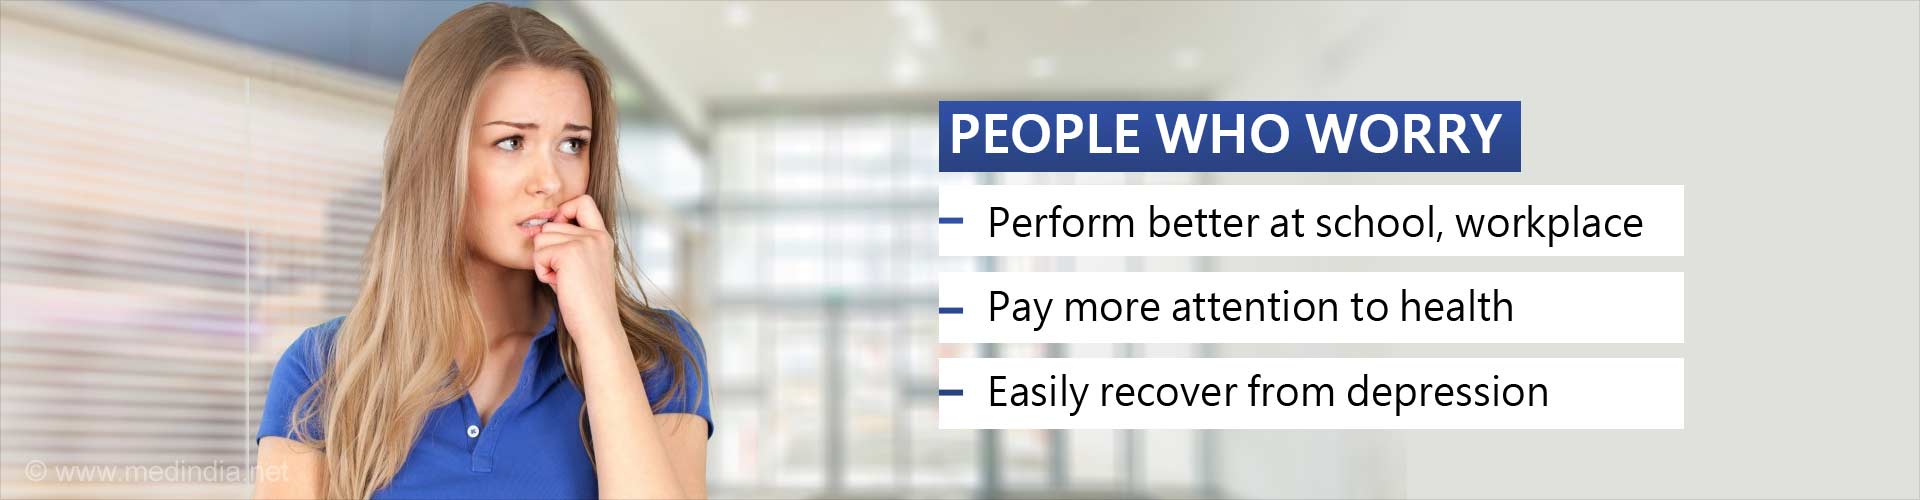 people who worry
- perform better a school, workplace
- pay more attention to health
- easily recover from depression